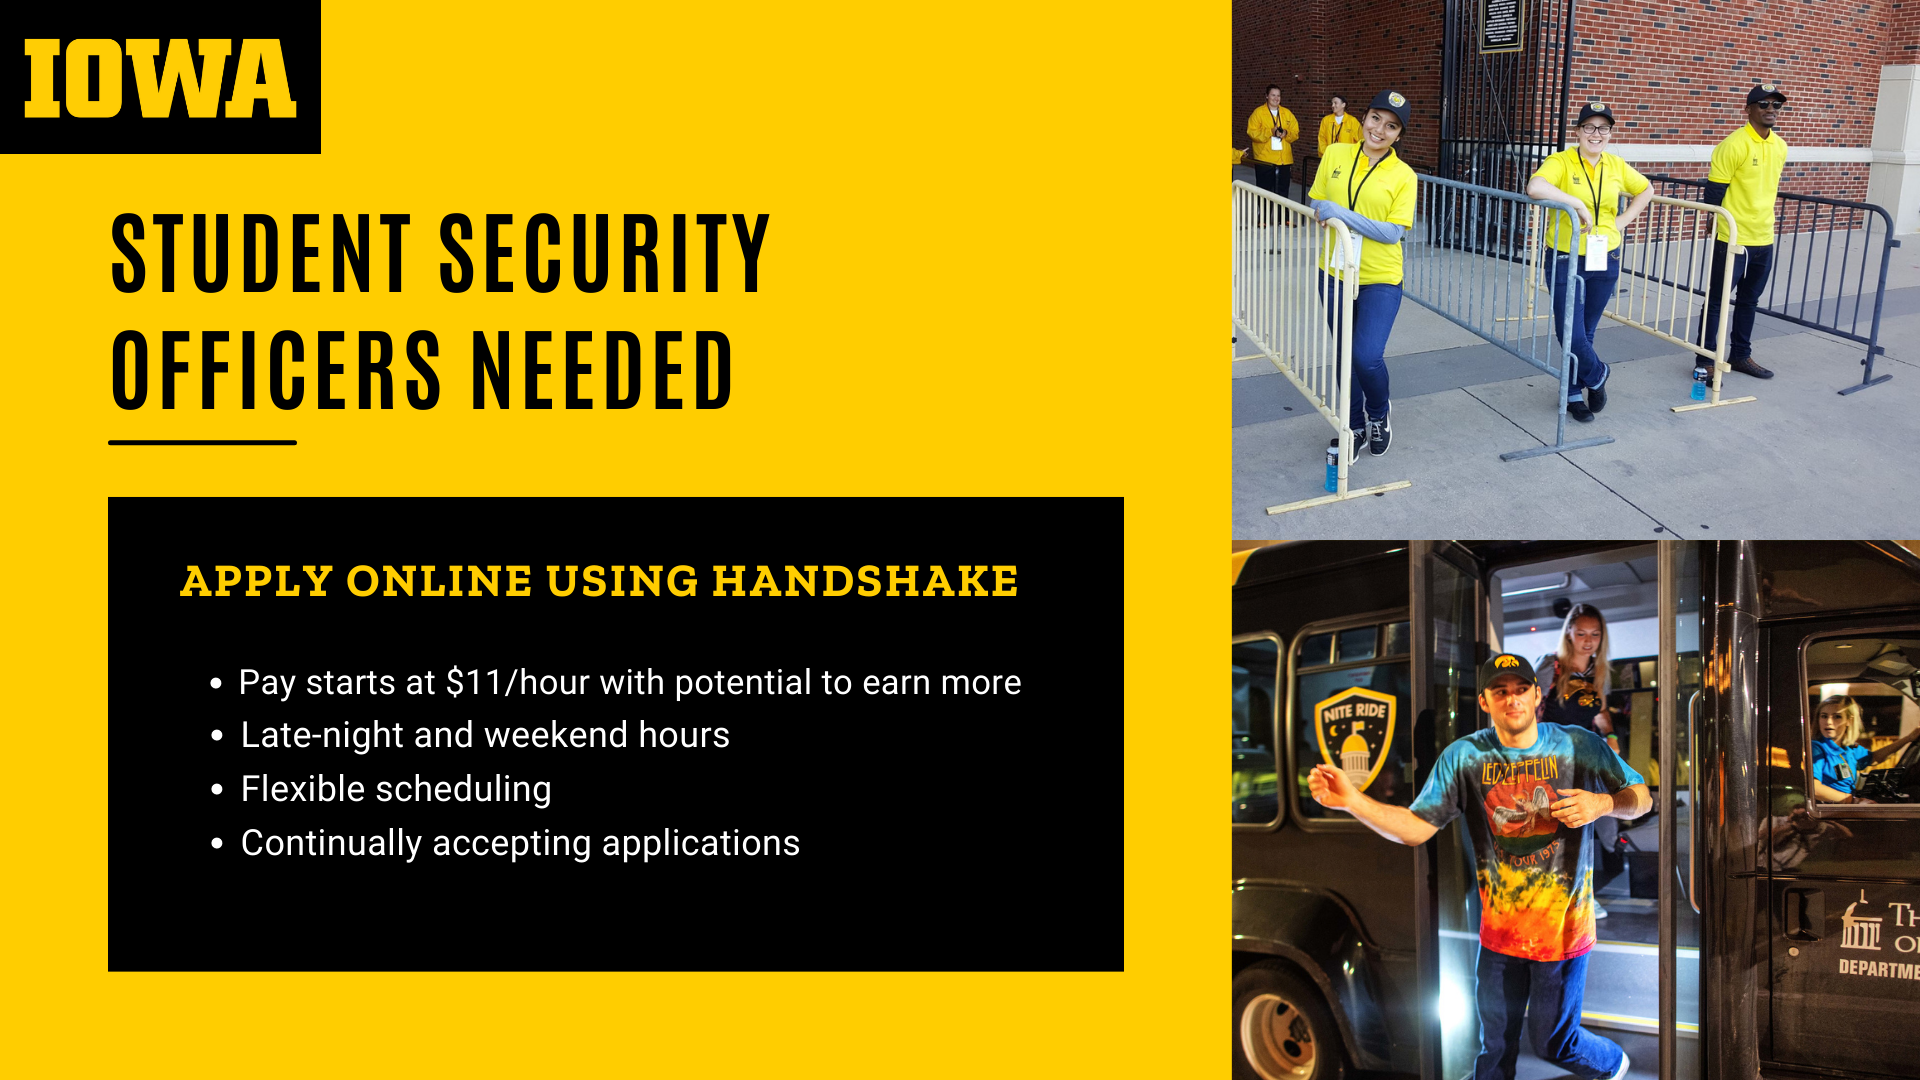 [ID] Black text on gold background says "Student Security Officers Needed Apply online using handshake."